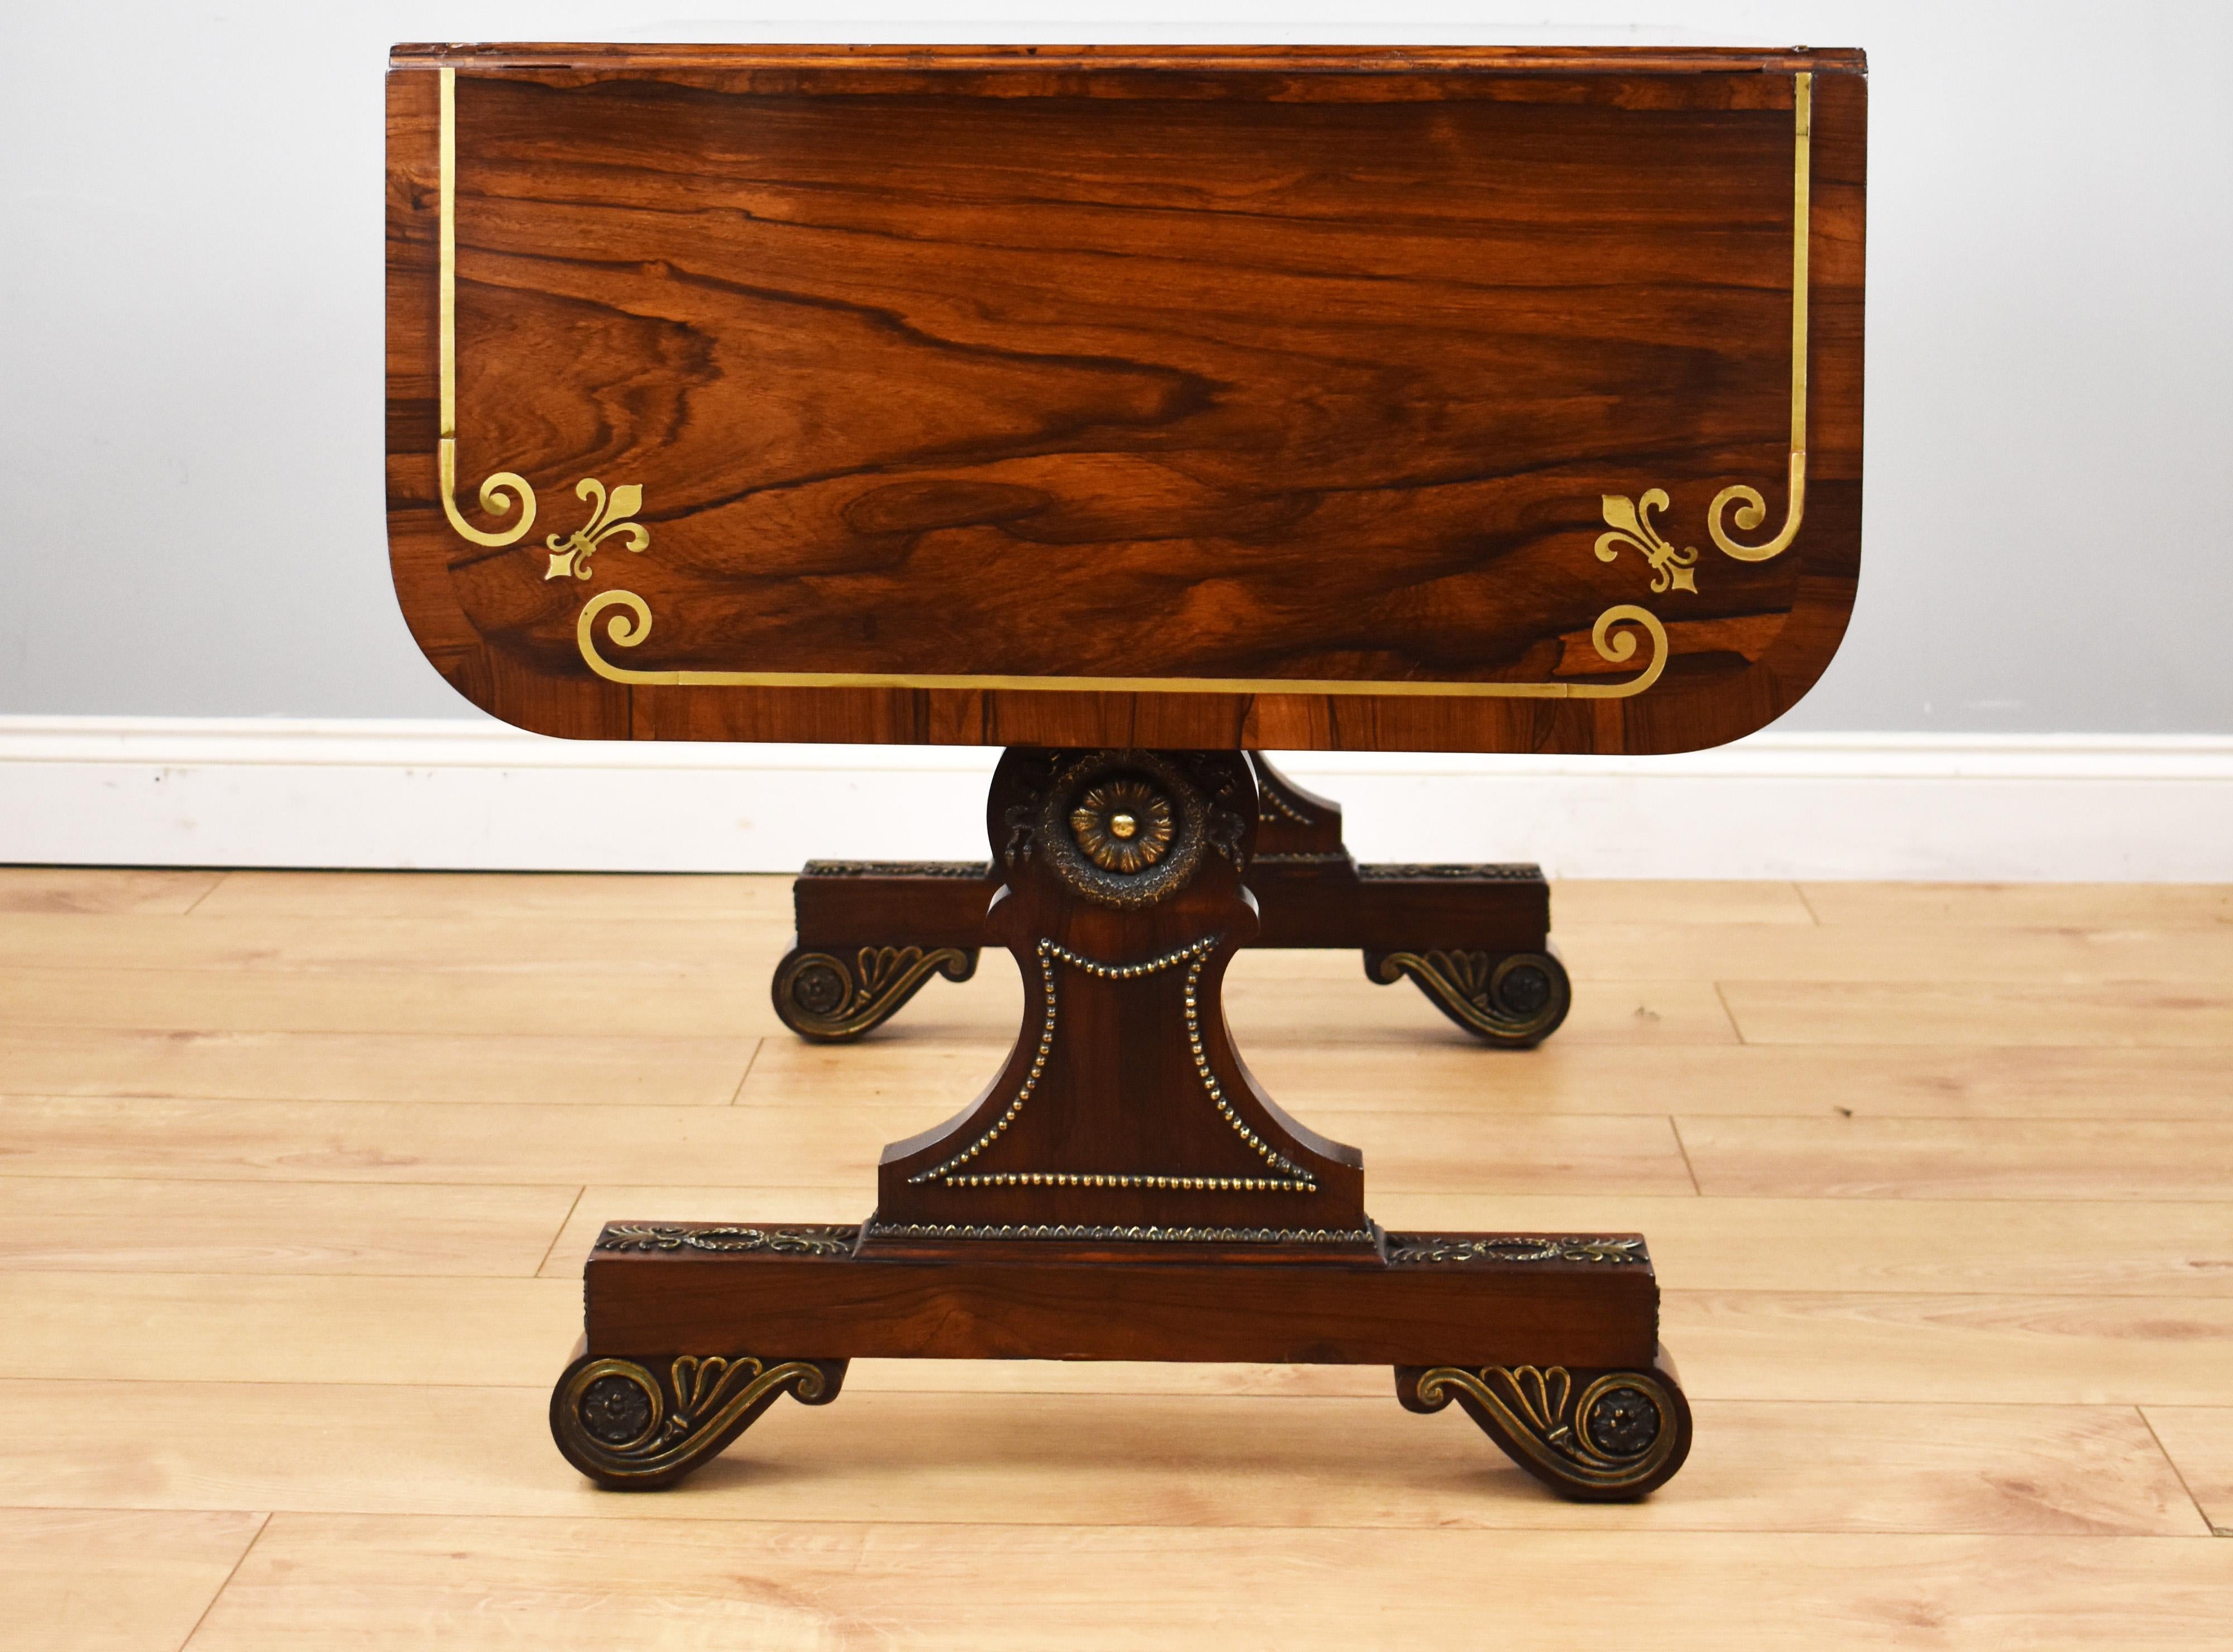 19th Century English Regency Period Rosewood and Brass Inlaid Sofa Table 5